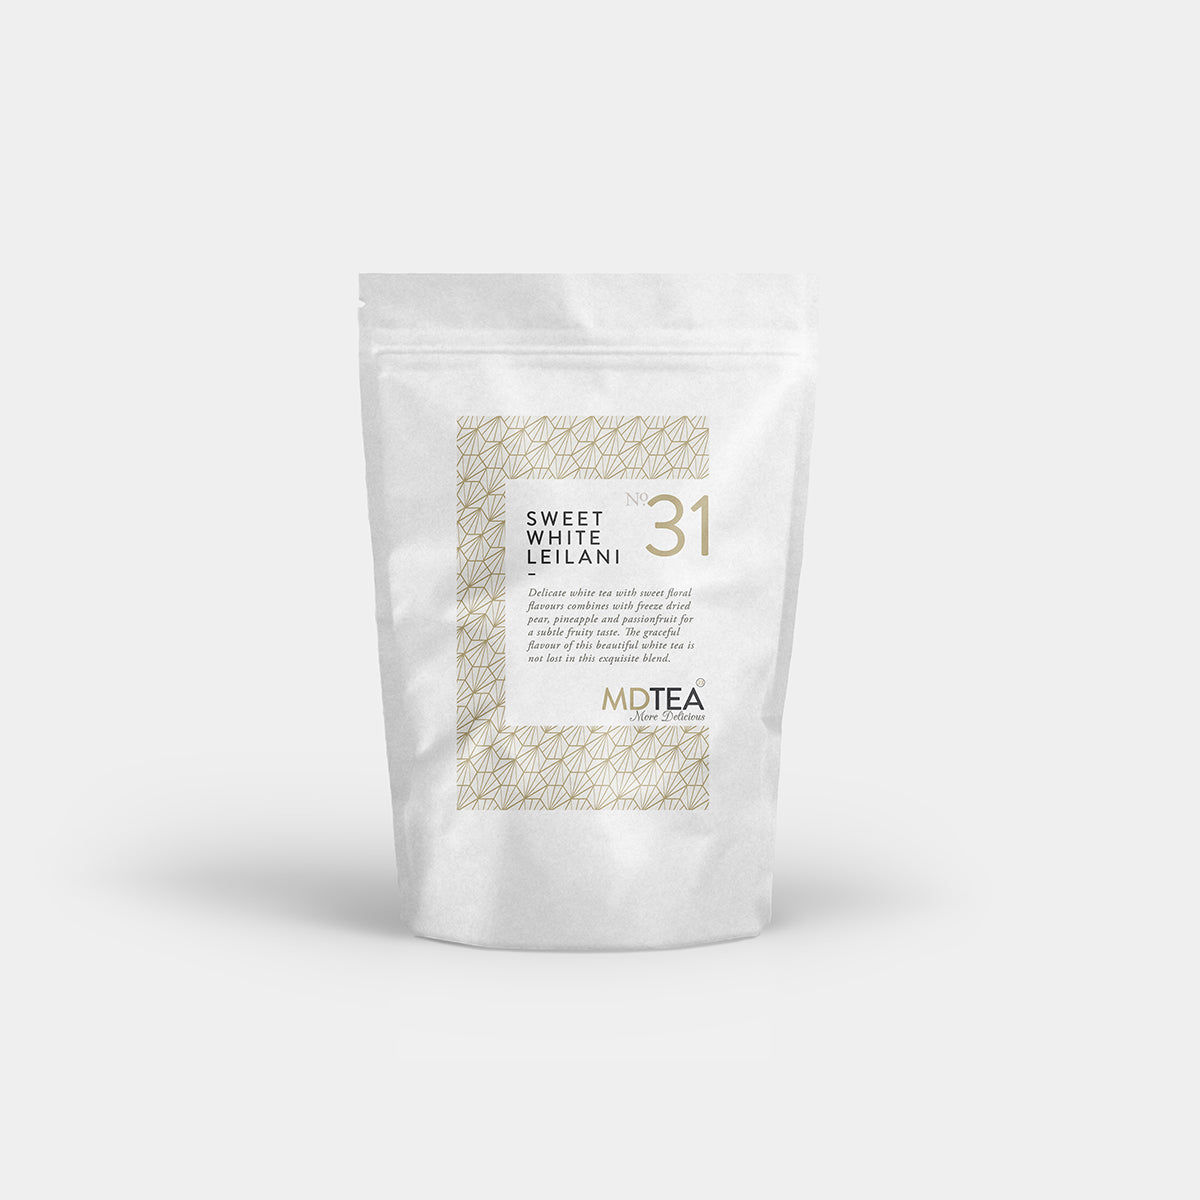 Sweet White Leilani – a refreshing white tea with passionfruit, pineapple and pear | MDTEA